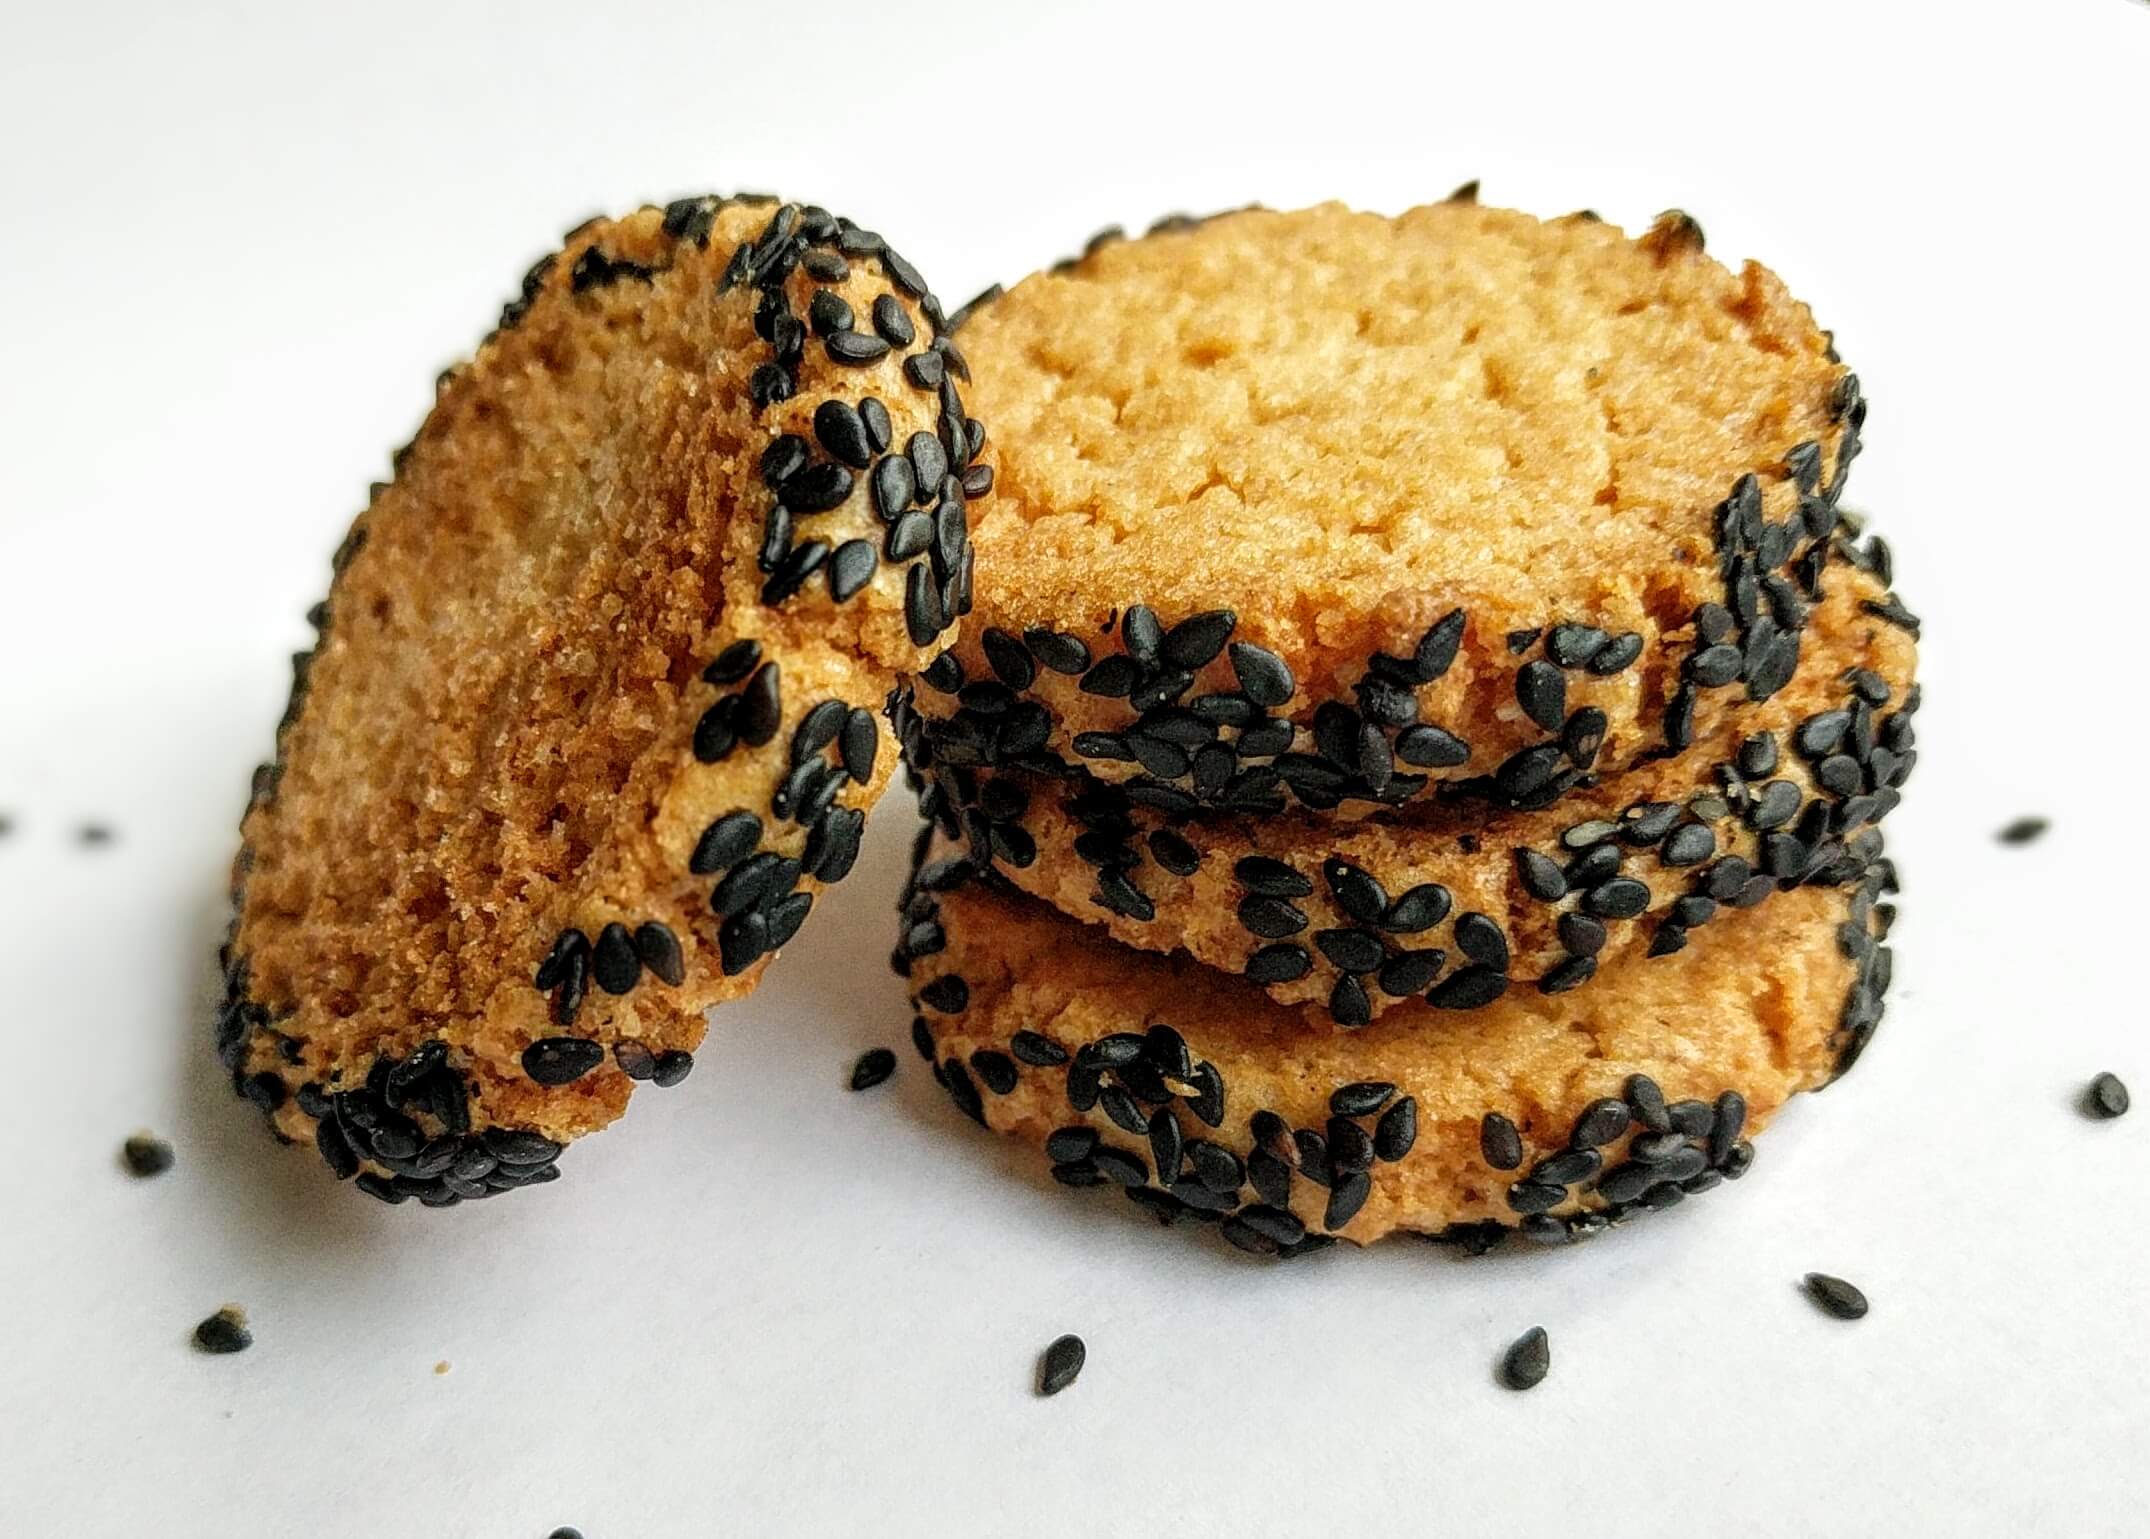 Sesame Cookies Recipe Step By Step Instructions